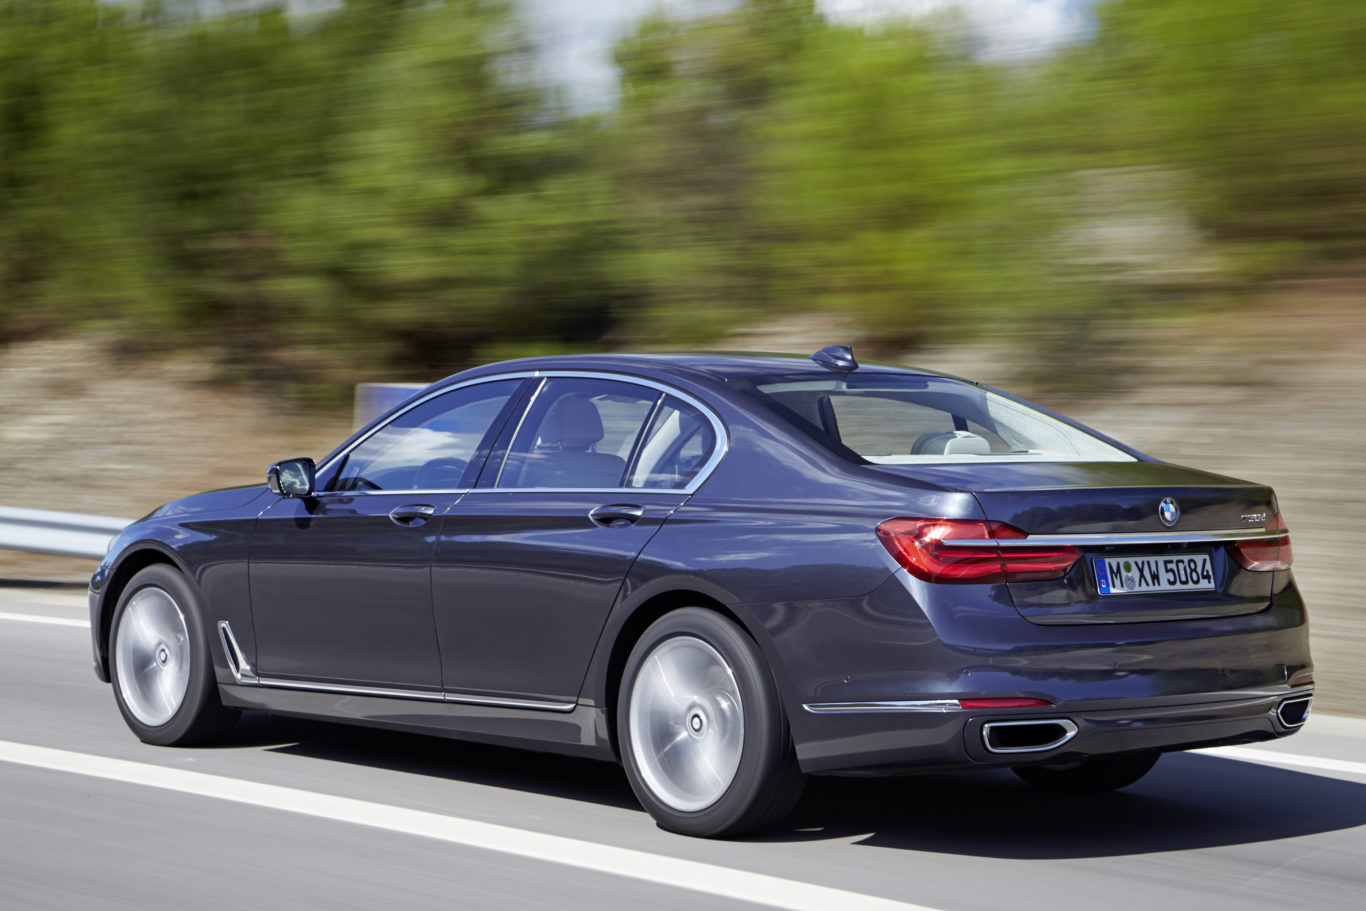 The 7 Series is a luxurious place to be for both passenger and driver